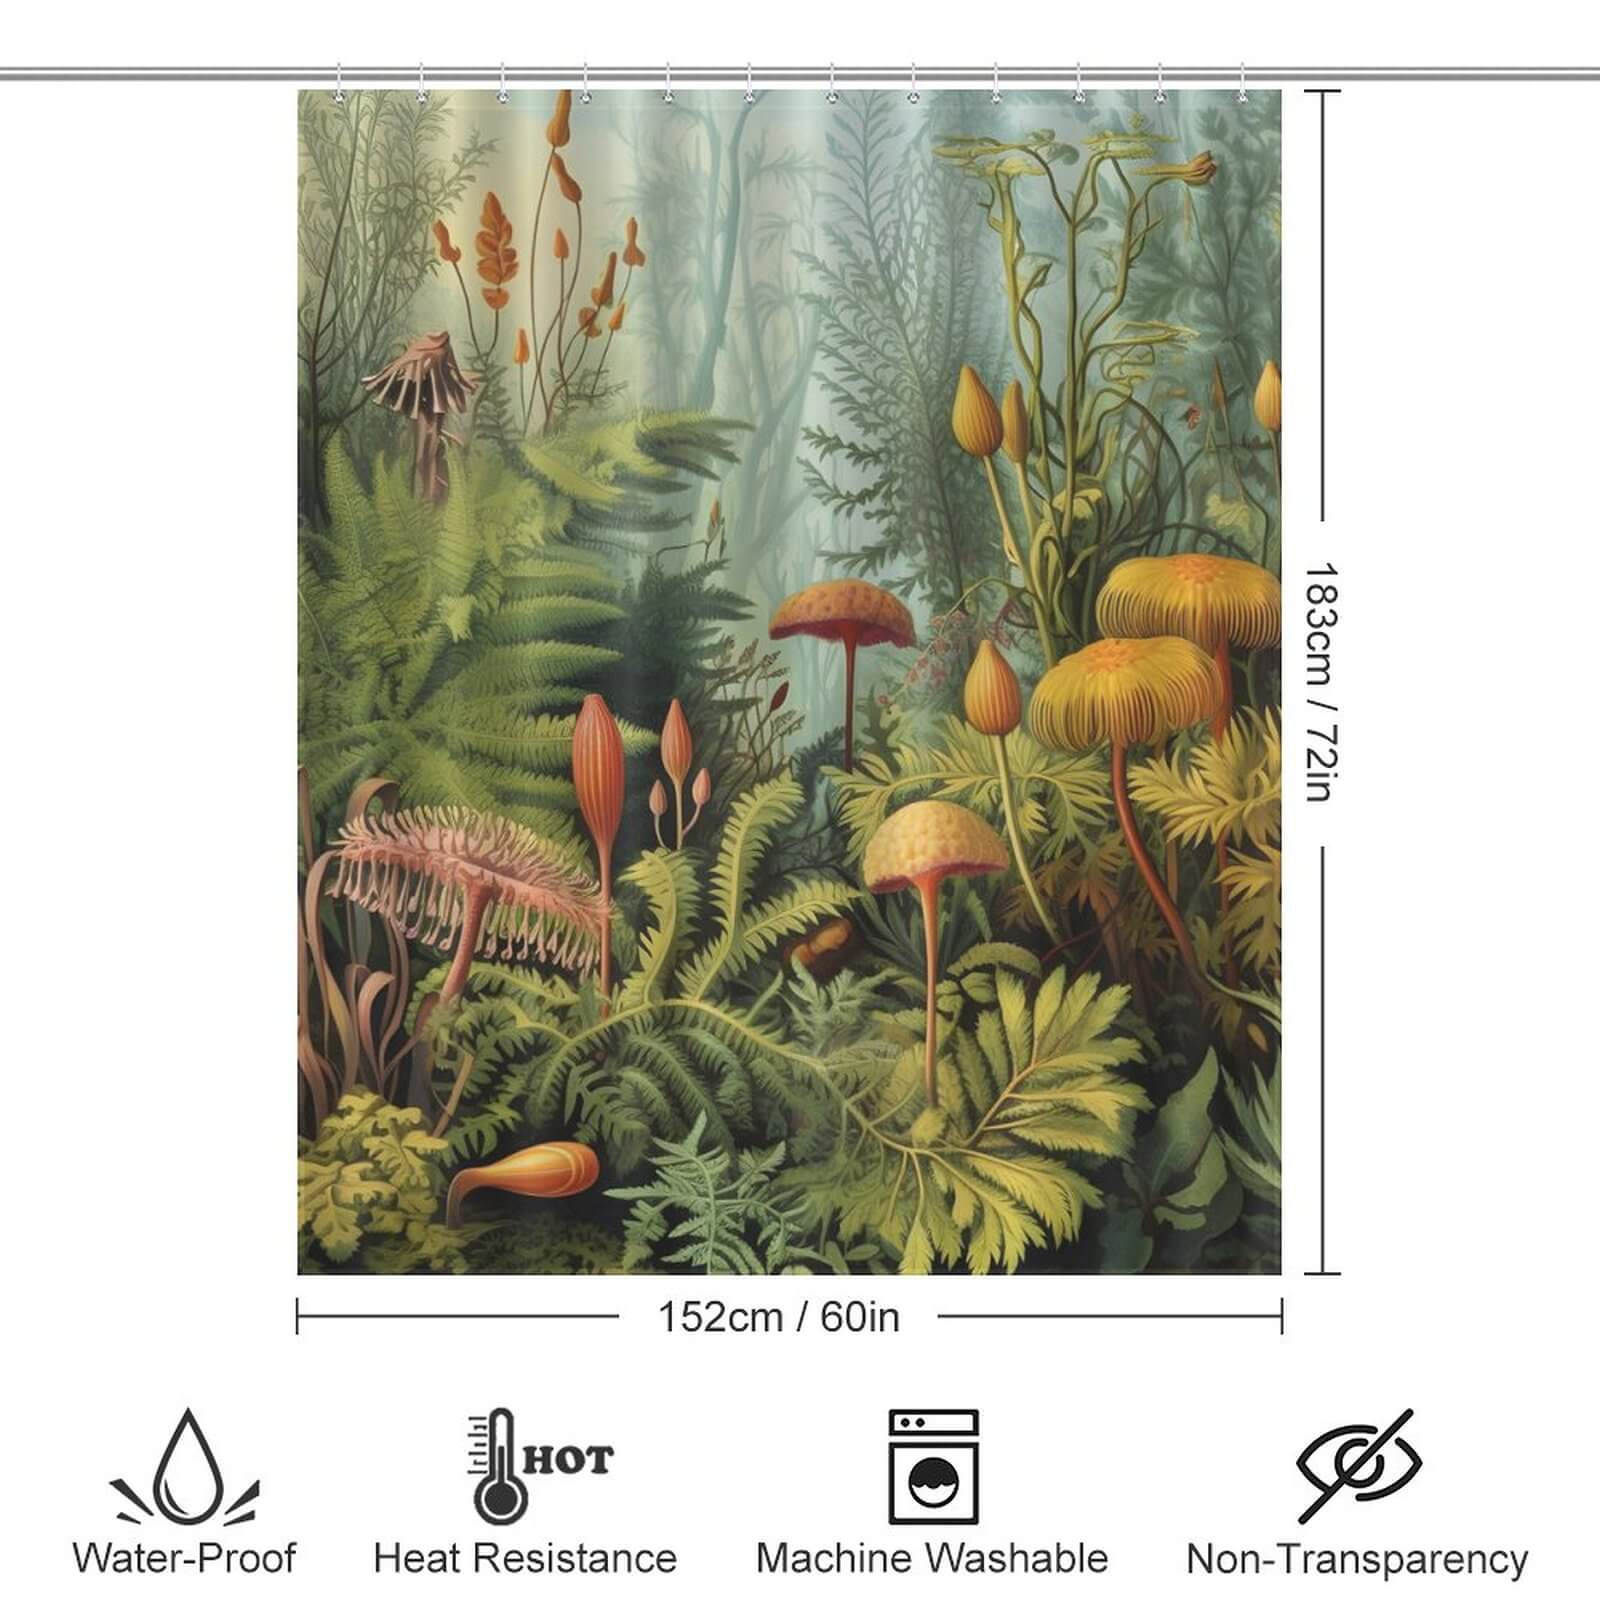 A Mushroom Jungle Shower Curtain by Cotton Cat featuring a jungle painting with plants and mushrooms.